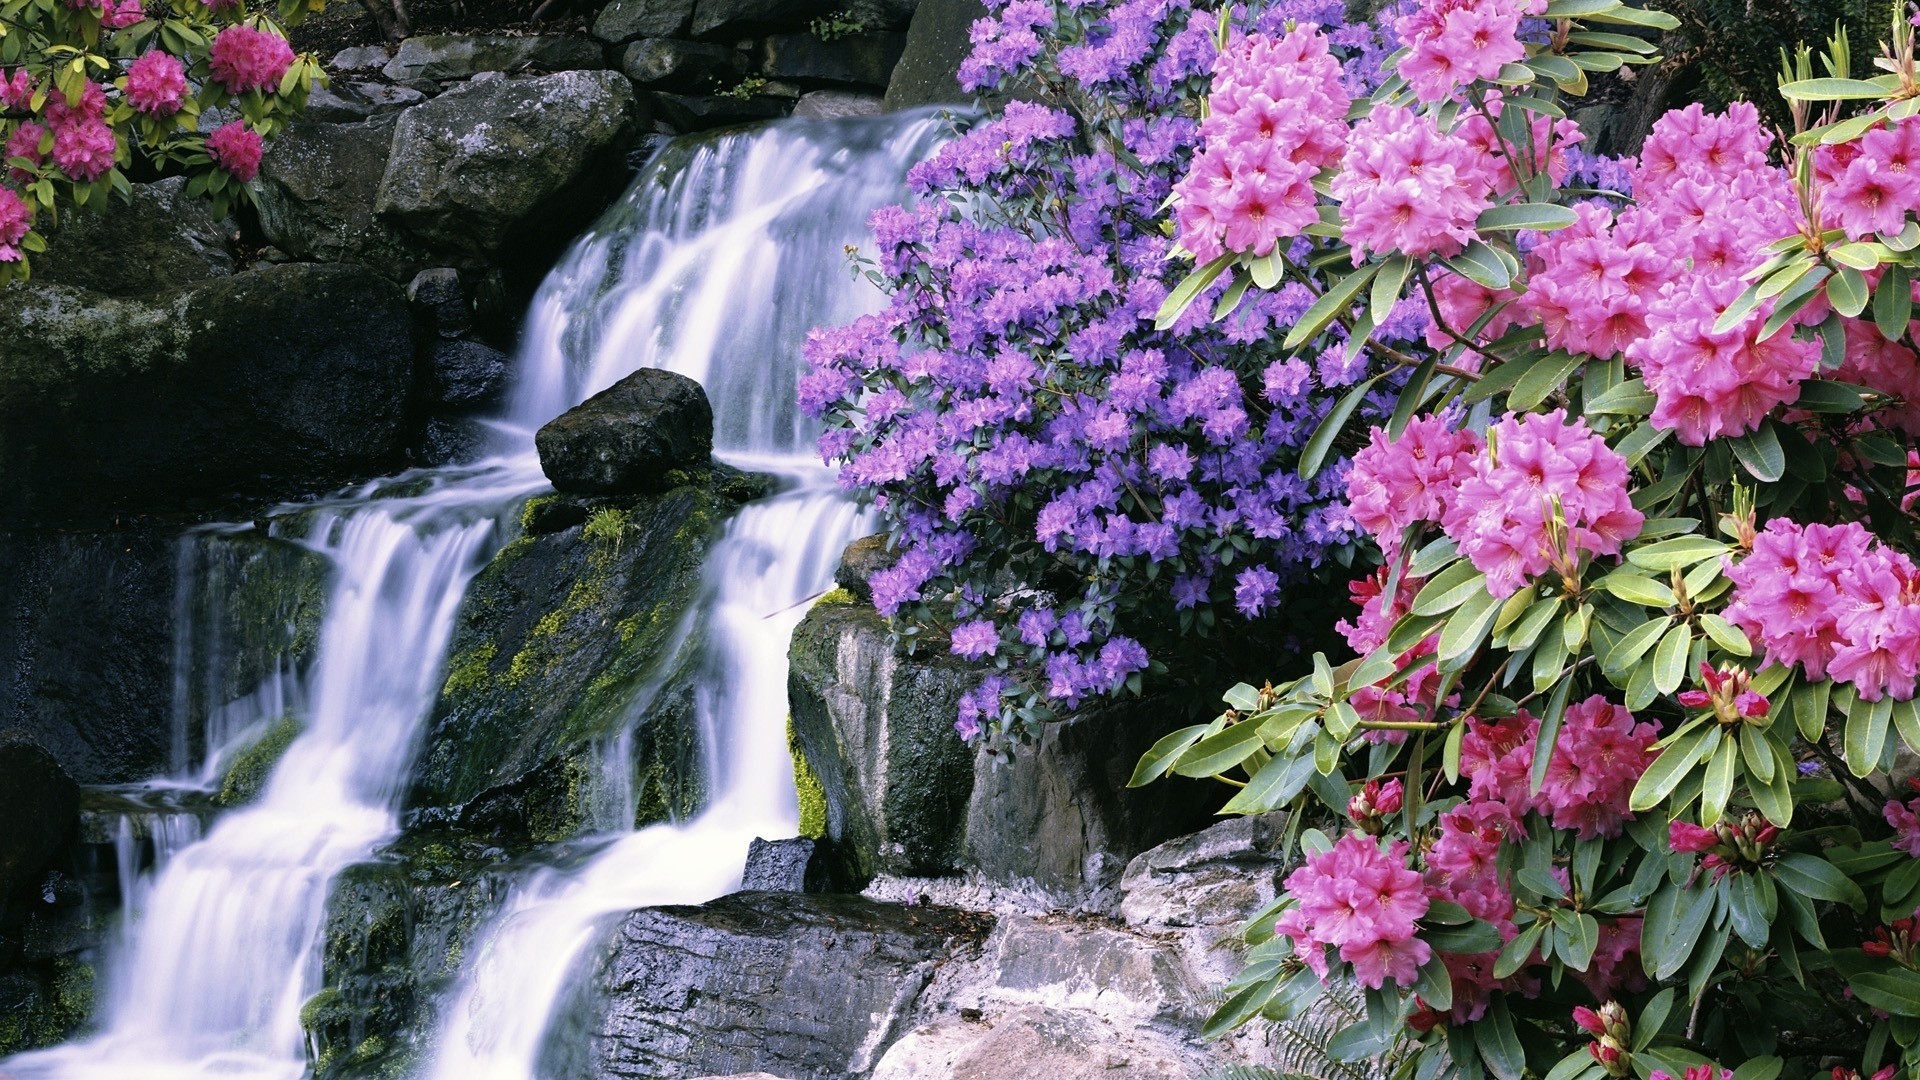 1920x1080 Most-Beautiful-Waterfalls-with-Flowers-Download-1920Ã1080-flowers-garden- crystals-oregon-portland-wallpaper-wpt7807271